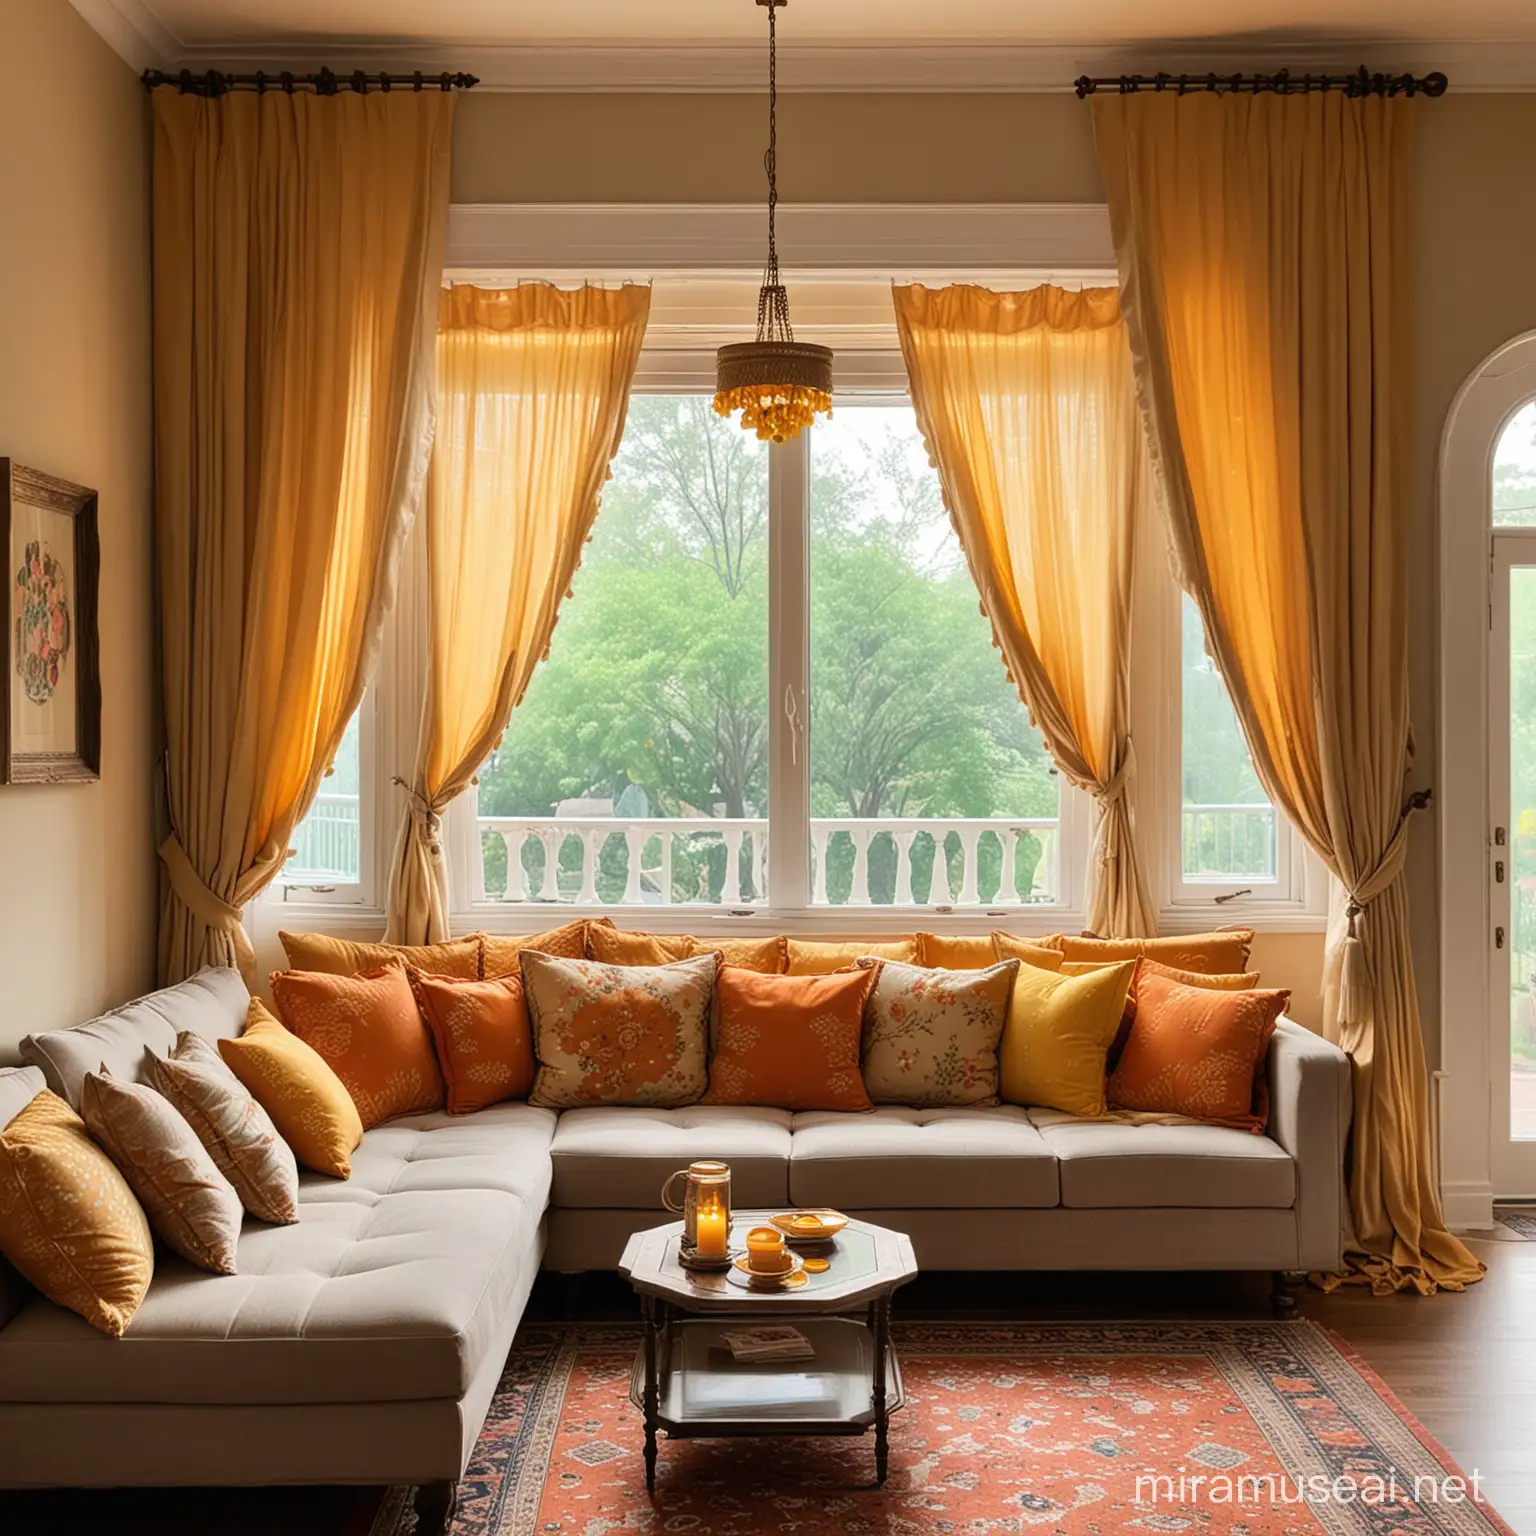 An Indian living room from the side angle, the window at the end of the room with light coming through and curtains on both sides pushed aside. Add a toran -flower garland arch made of yellow and orange marigold flowers on the top of the window between the curtains. It has a comfy sofa on the right decorated with 5 silky and orange pillows. There is an antique coffee table in front of the sofa with a few tea lights on it.